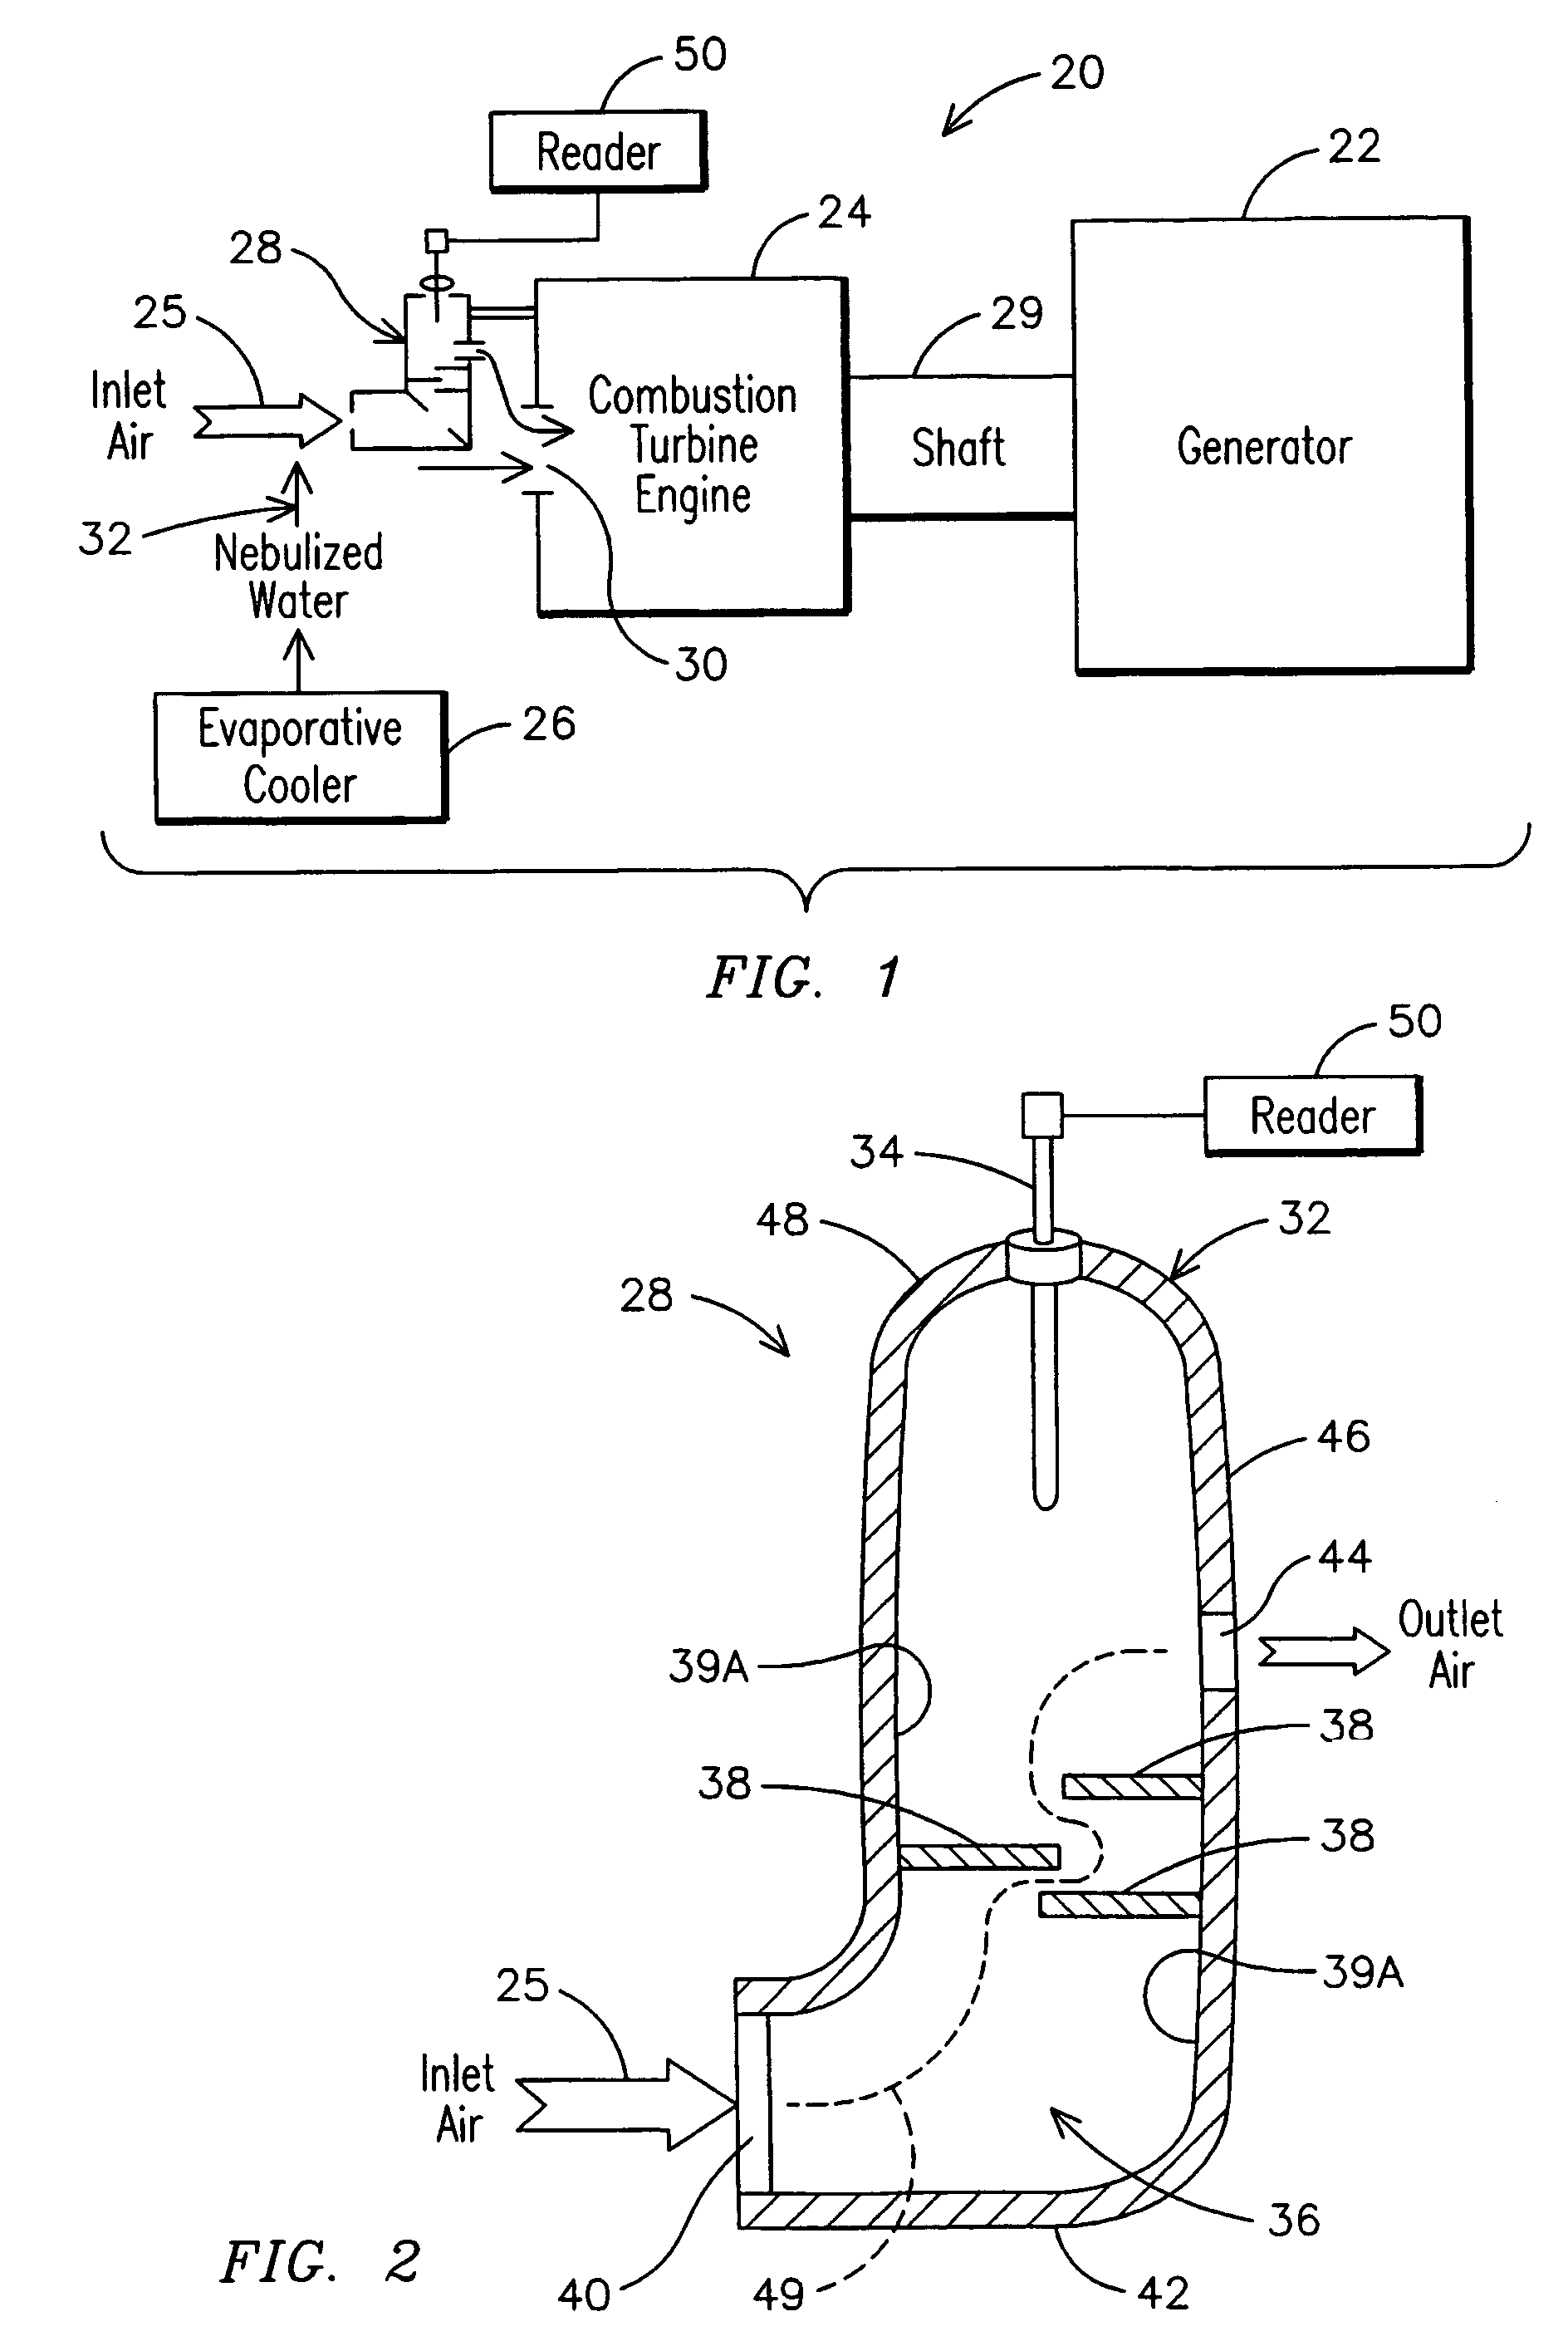 Inlet airflow cooling control for a power generating system